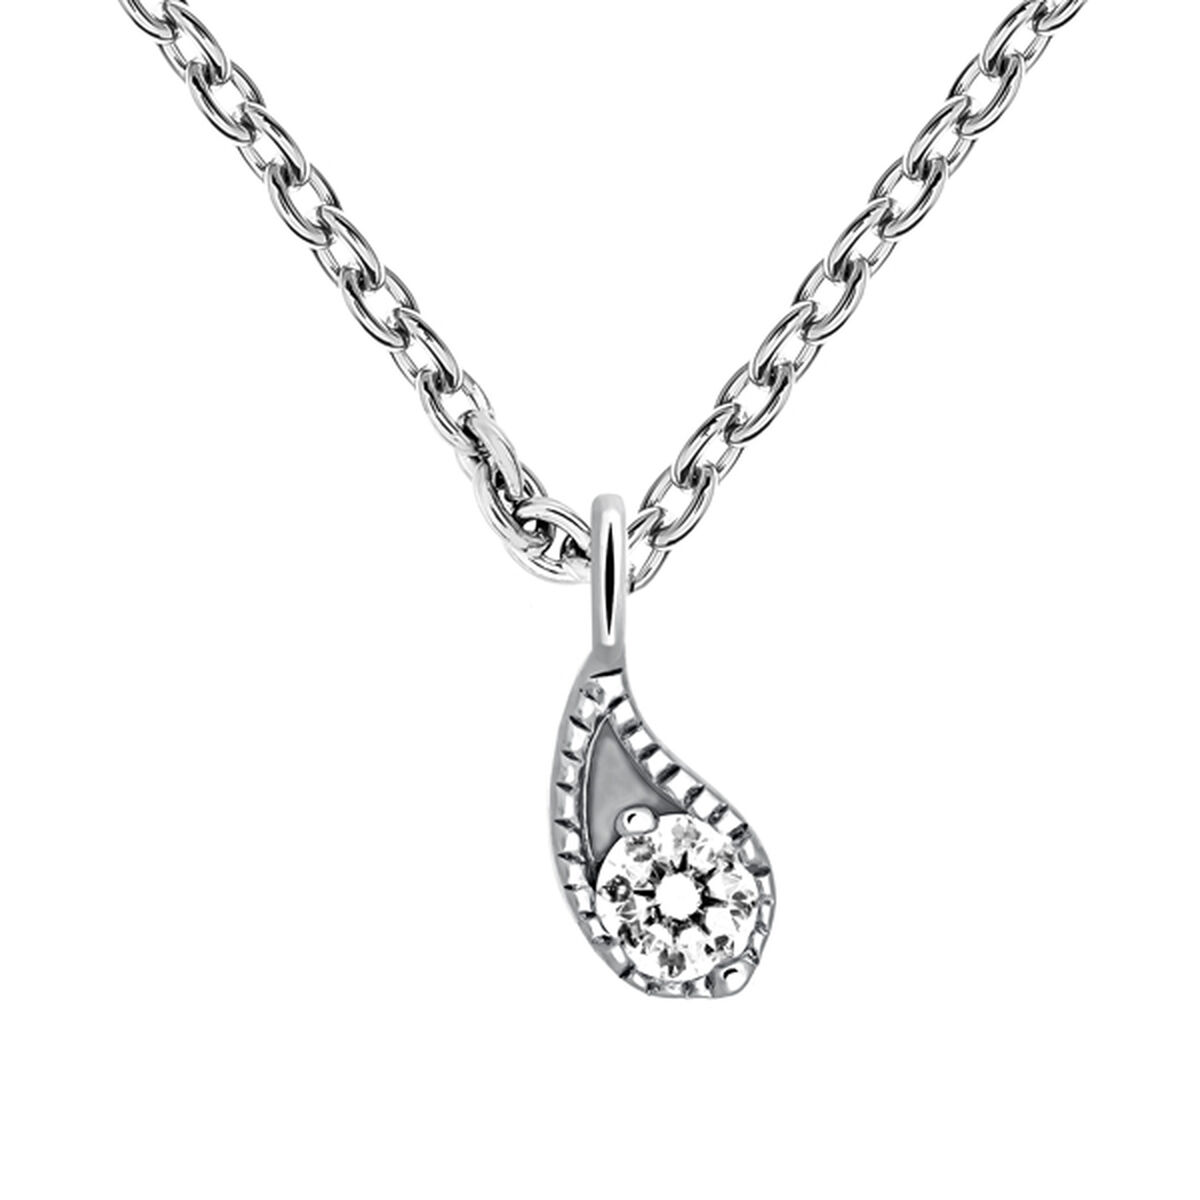 Collier diamant or blanc 0,061 ct , J03397-01, mainproduct